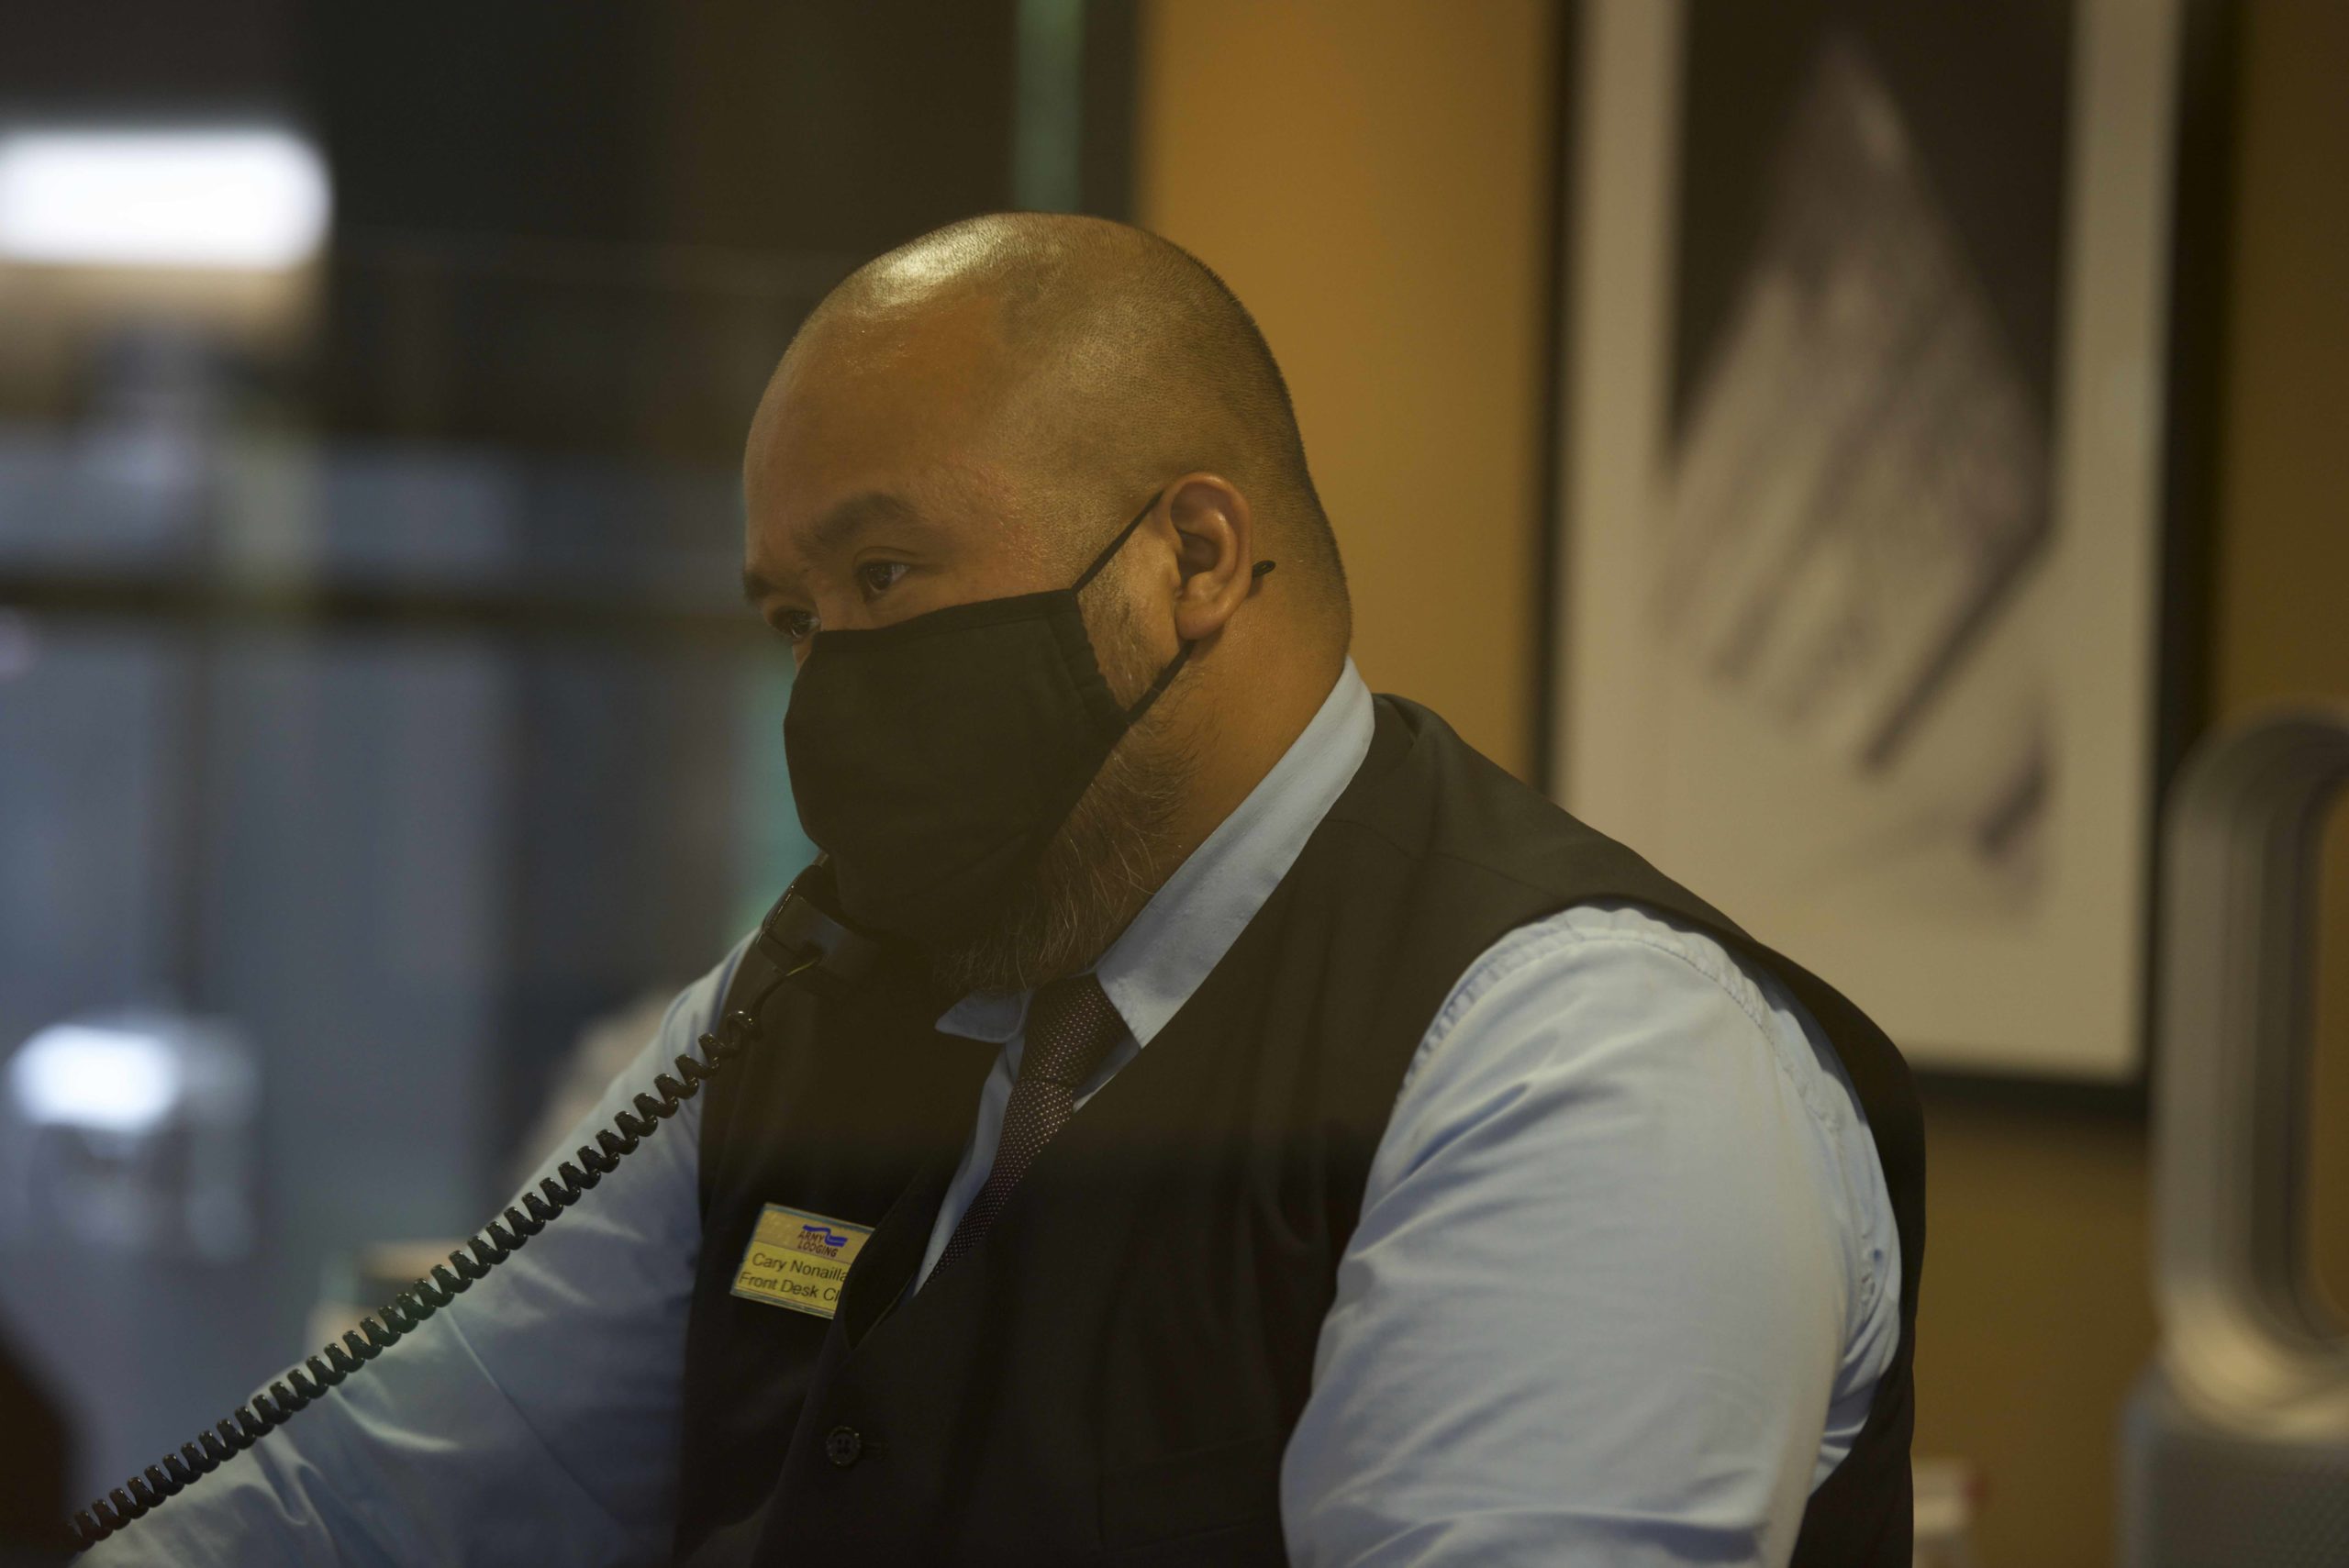 A masked hotel worker answers the phone